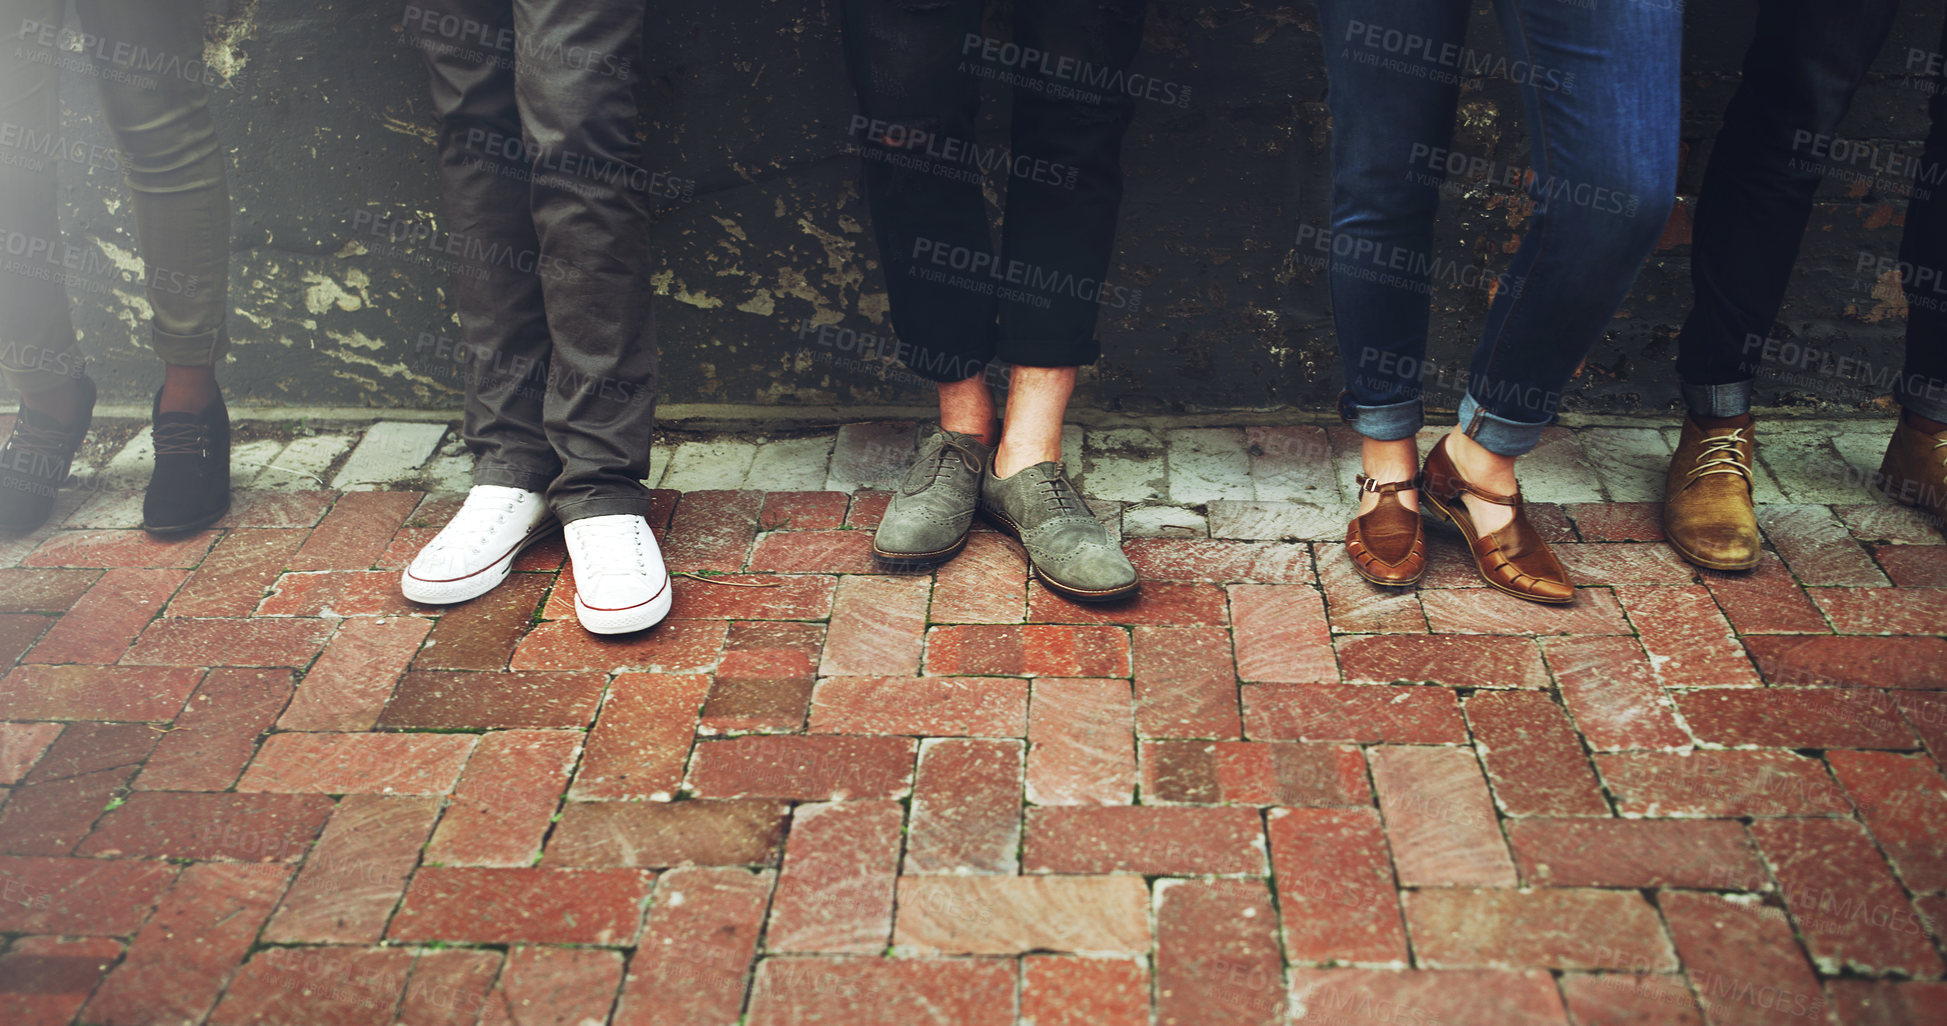 Buy stock photo Cropped shot of a diverse group of people standing together on a paved sidewalk